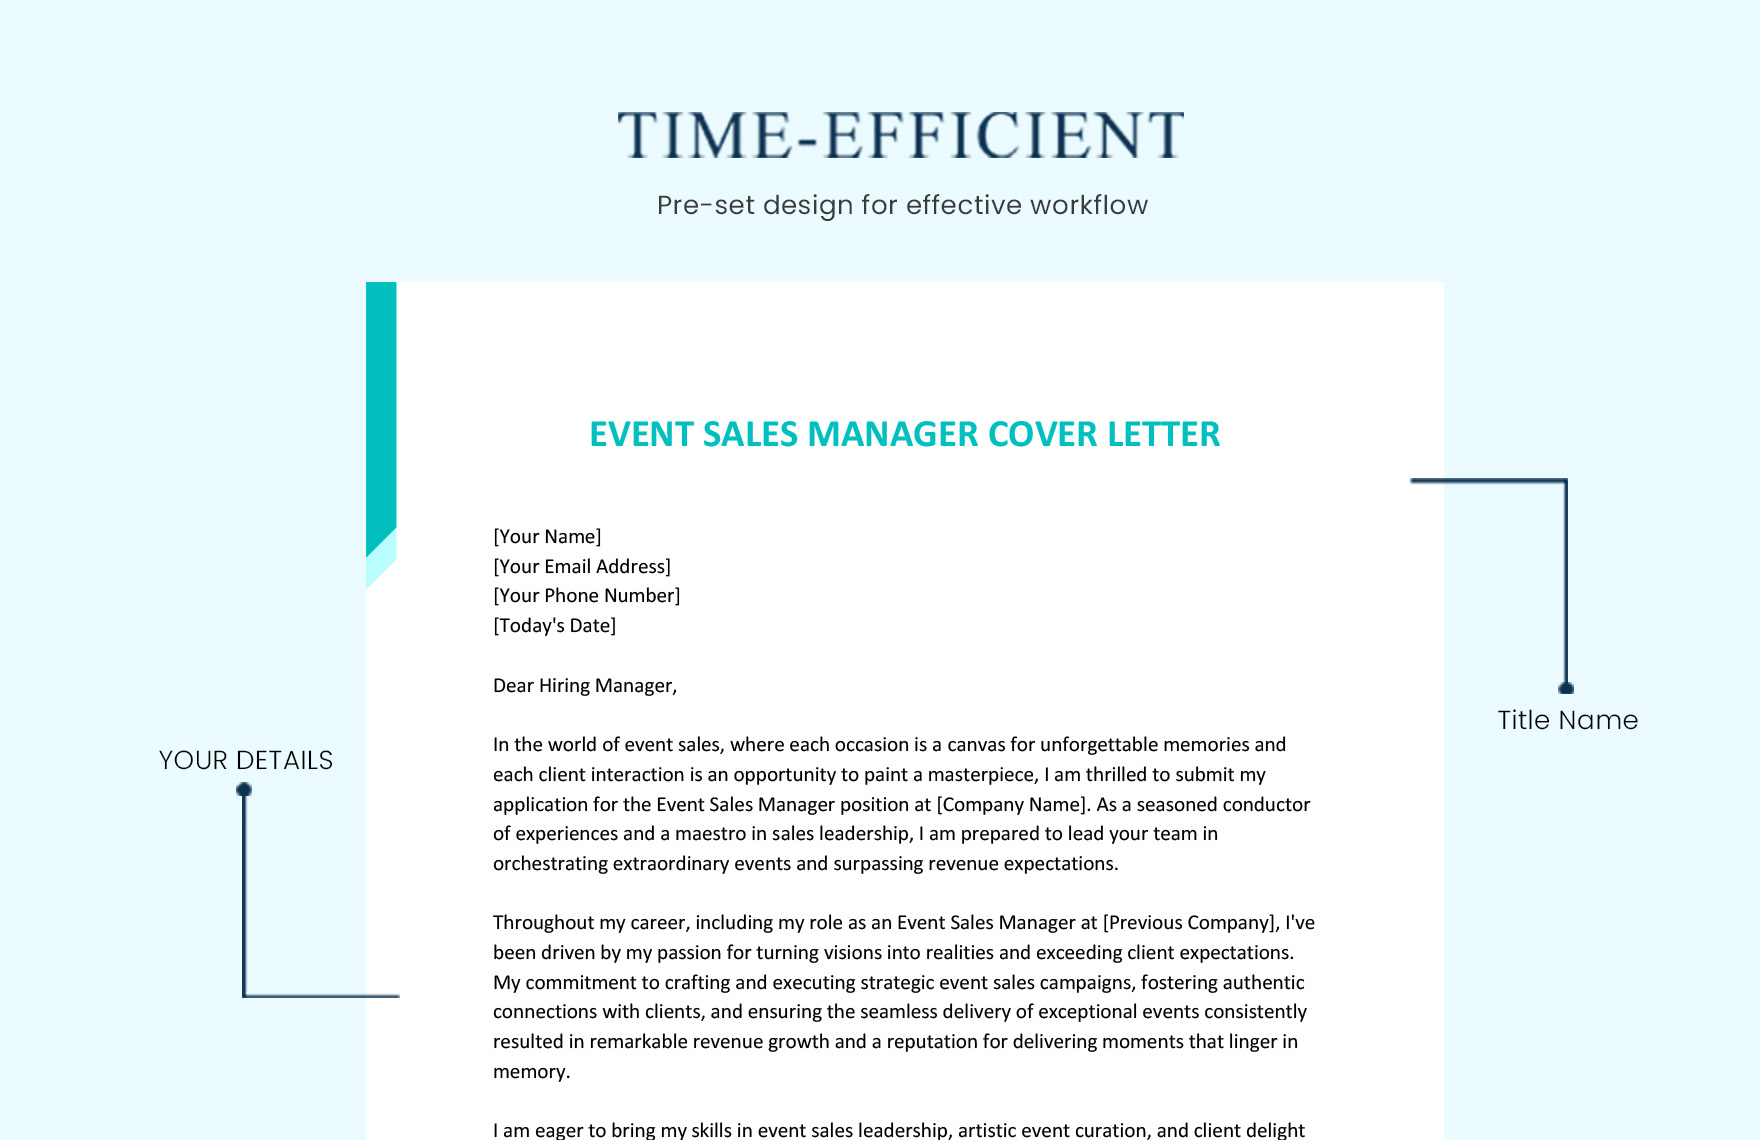 Event Sales Manager Cover Letter